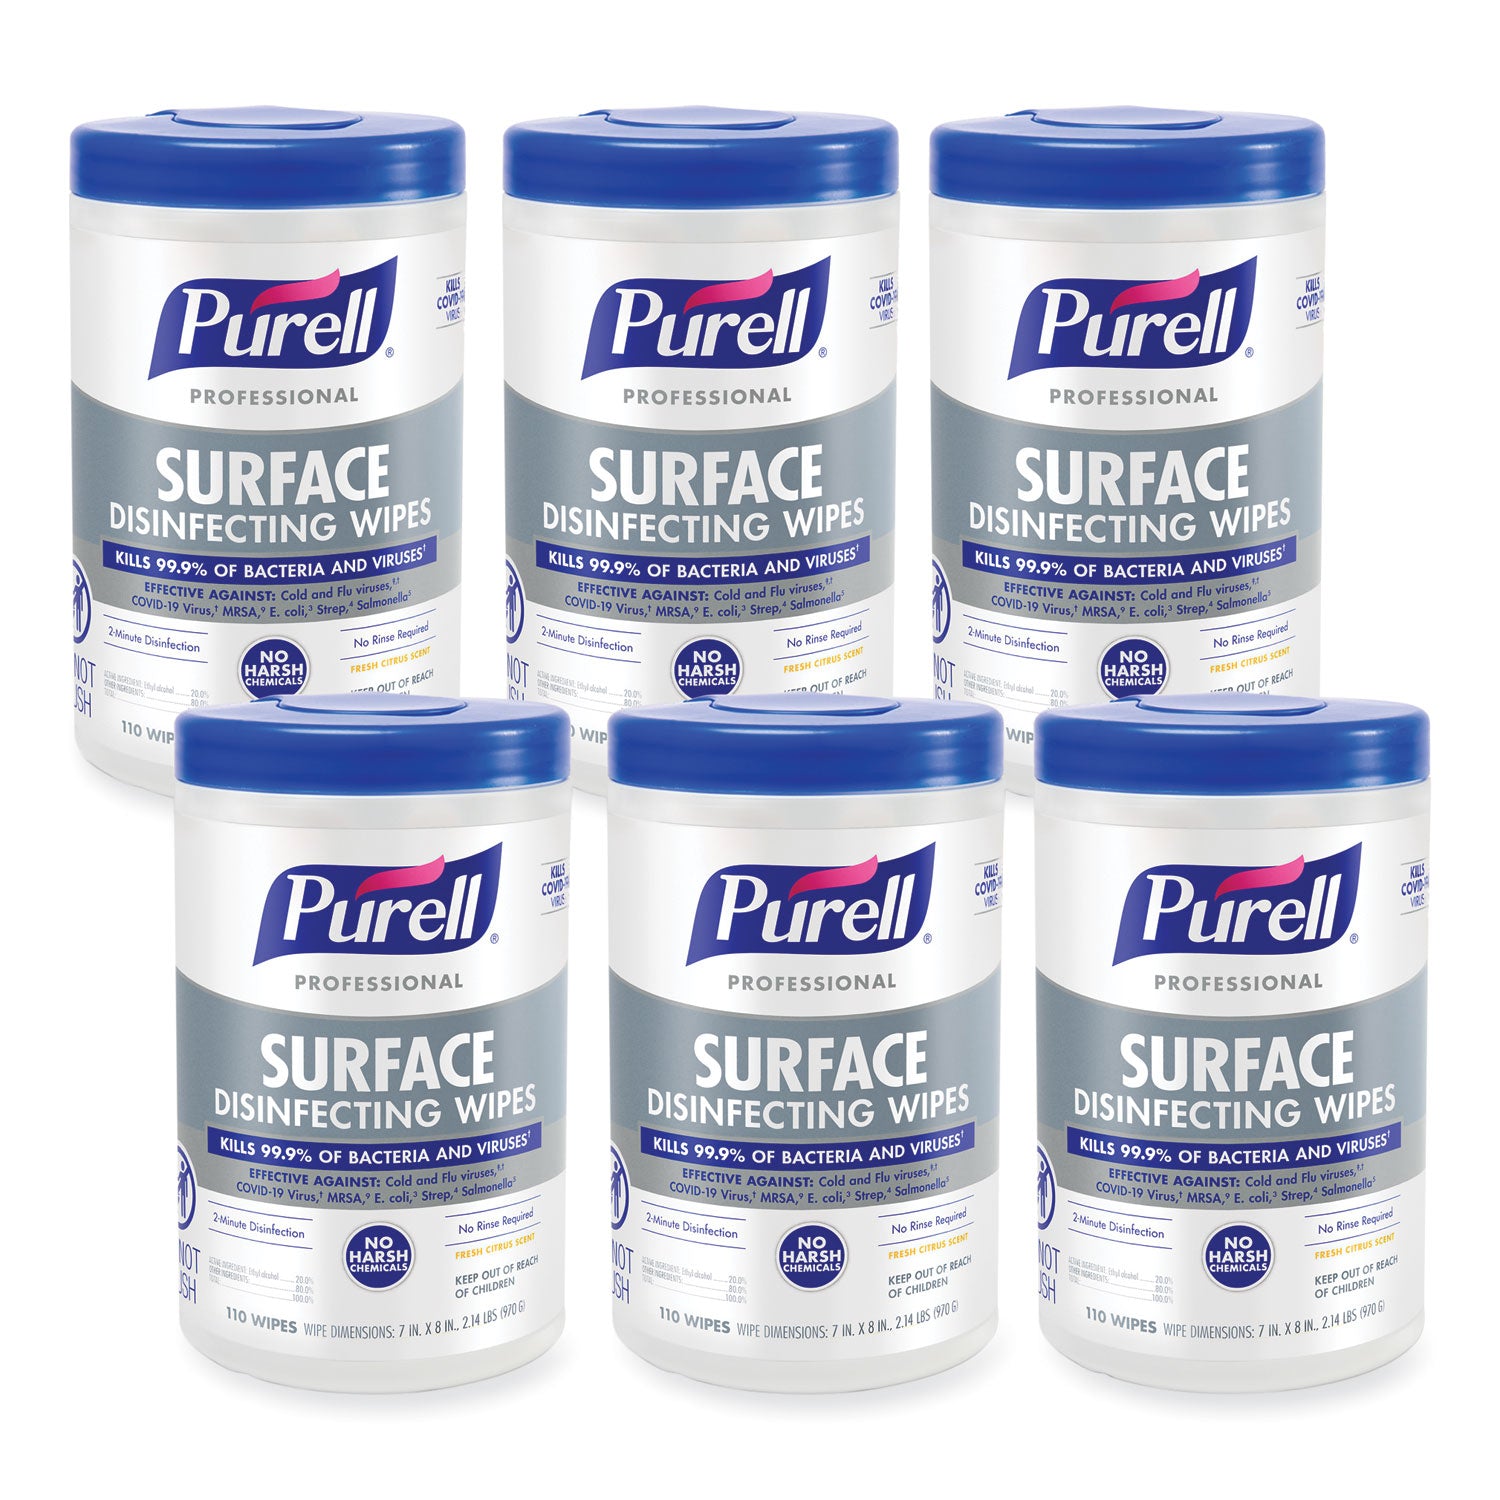 professional-surface-disinfecting-wipes-1-ply-7-x-8-fresh-citrus-white-110-canister-6-canisters-carton_goj934206ct - 1